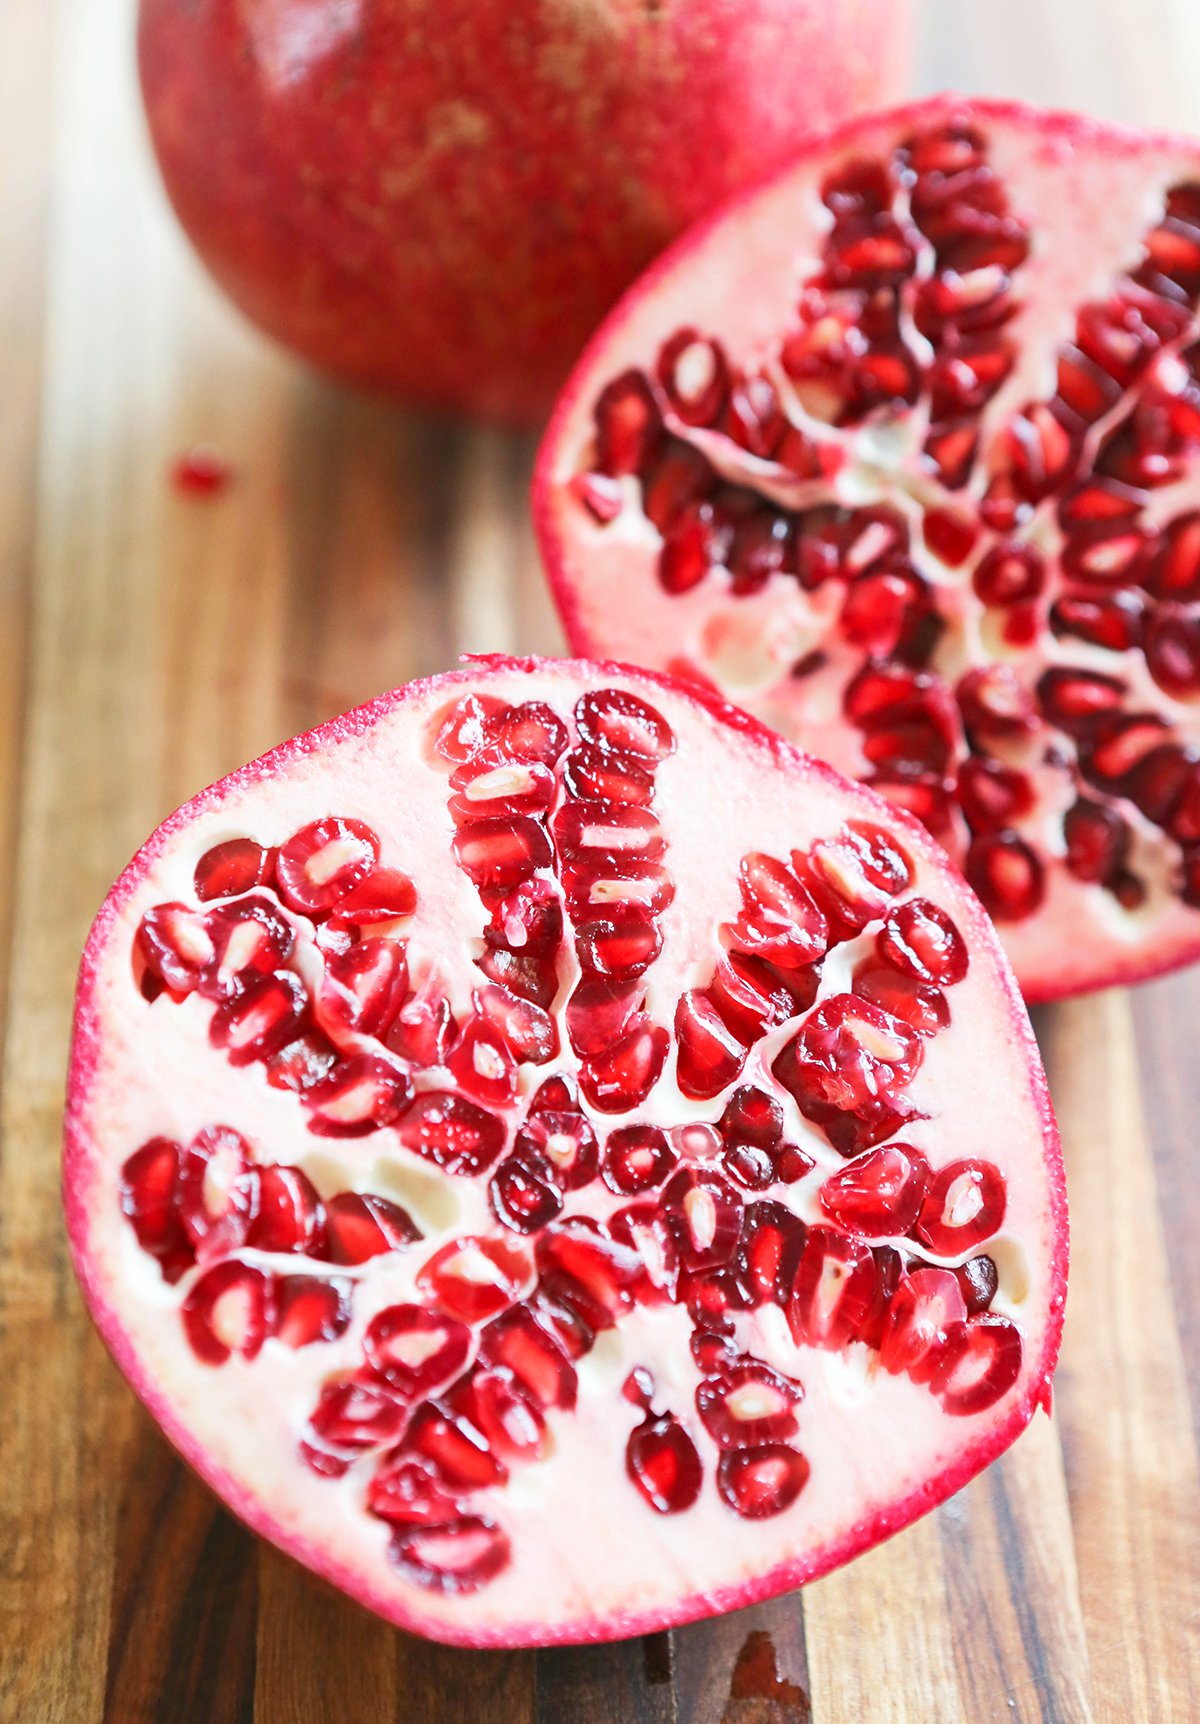 Close up of a pomegranate cut in half, exposing feeds.